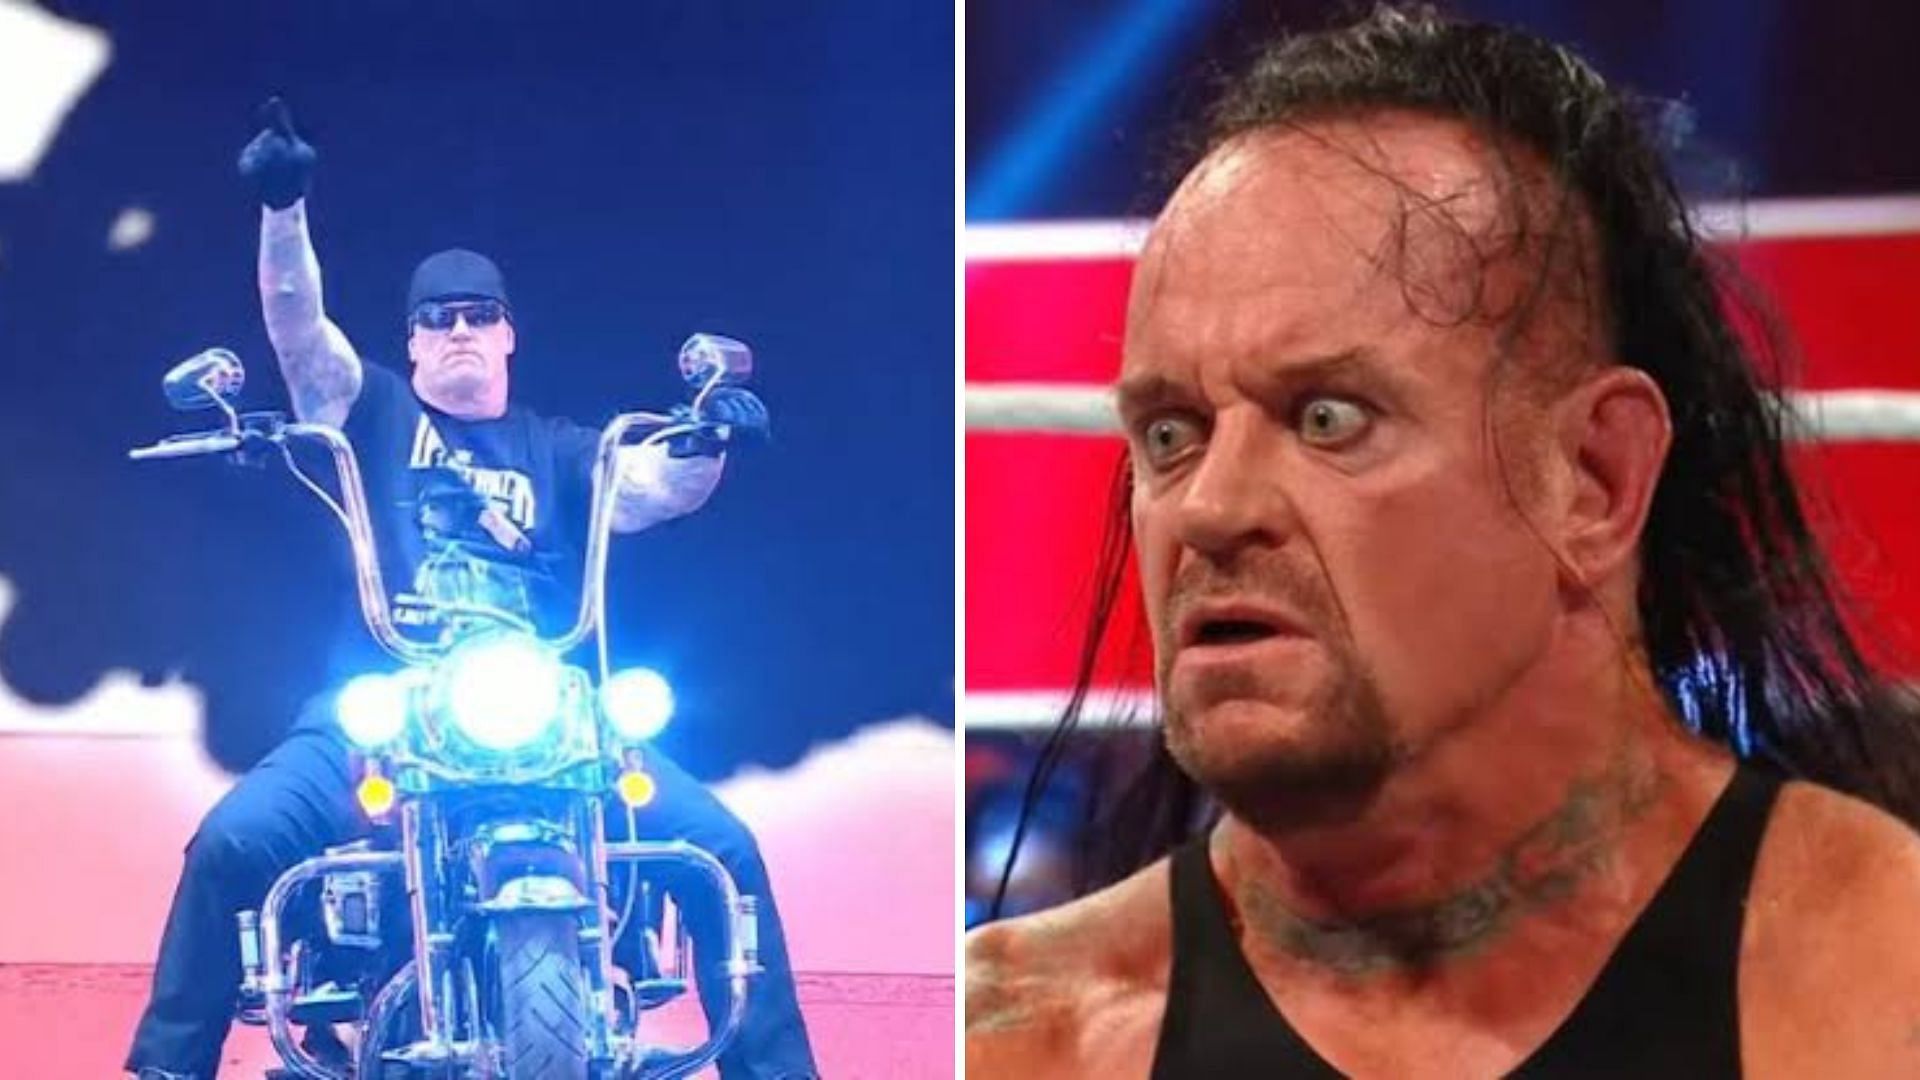 The Deadman is one of wrestling